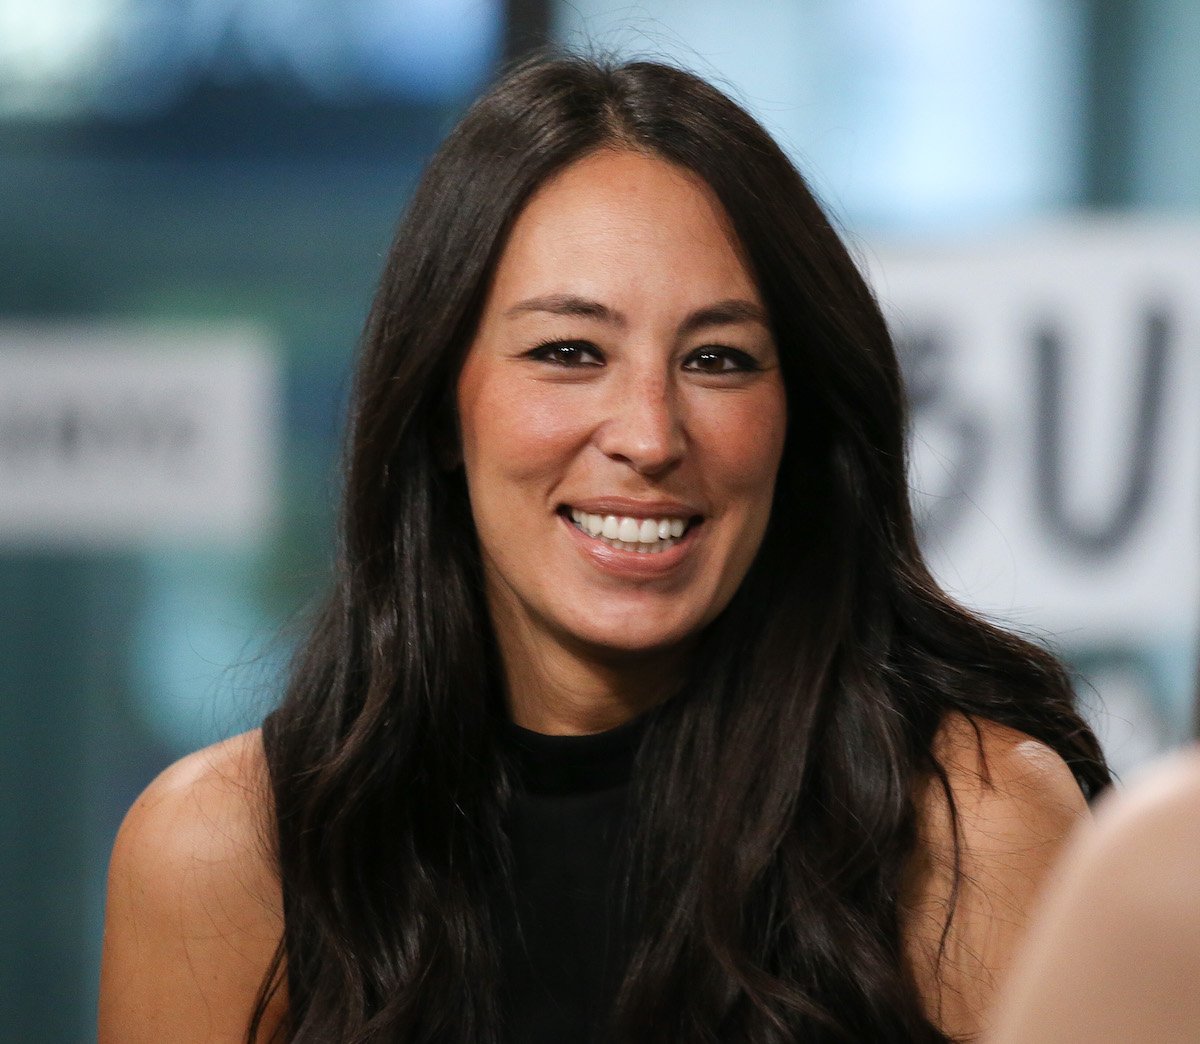 Joanna Gaines, who is passionate about baking, smiles for the camera.